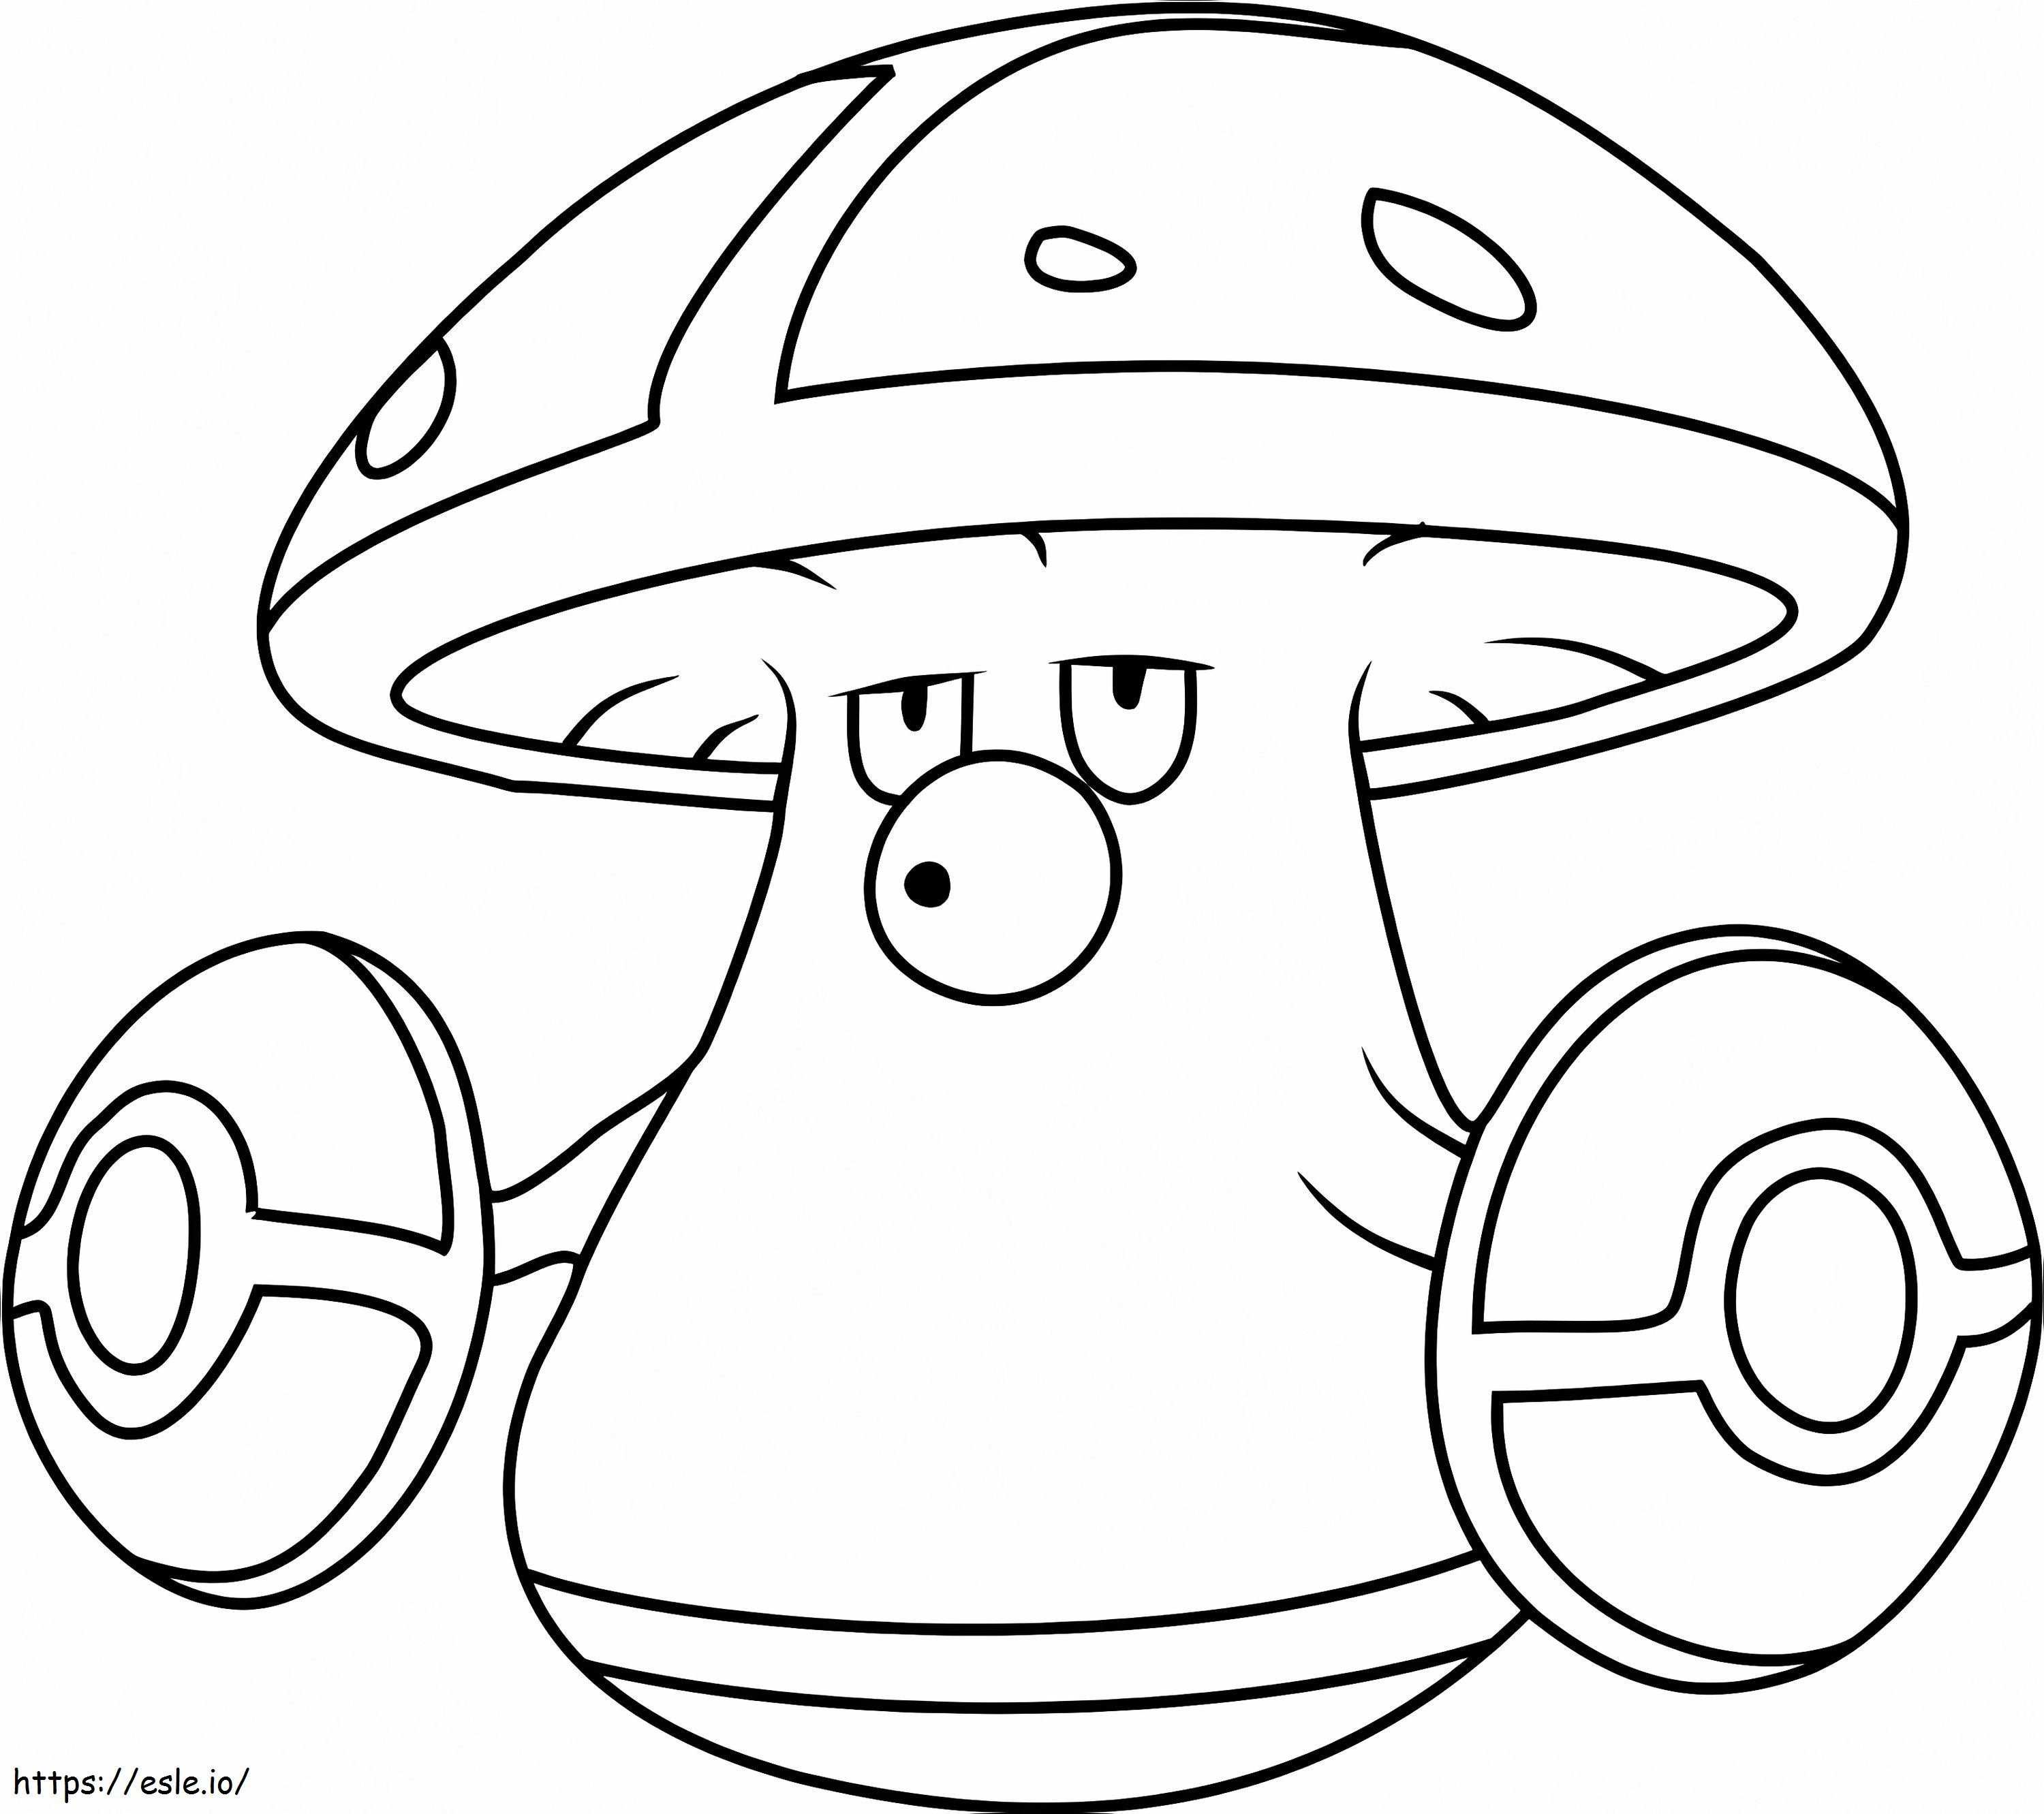 Amoonguss Gen 5 Pokemon coloring page